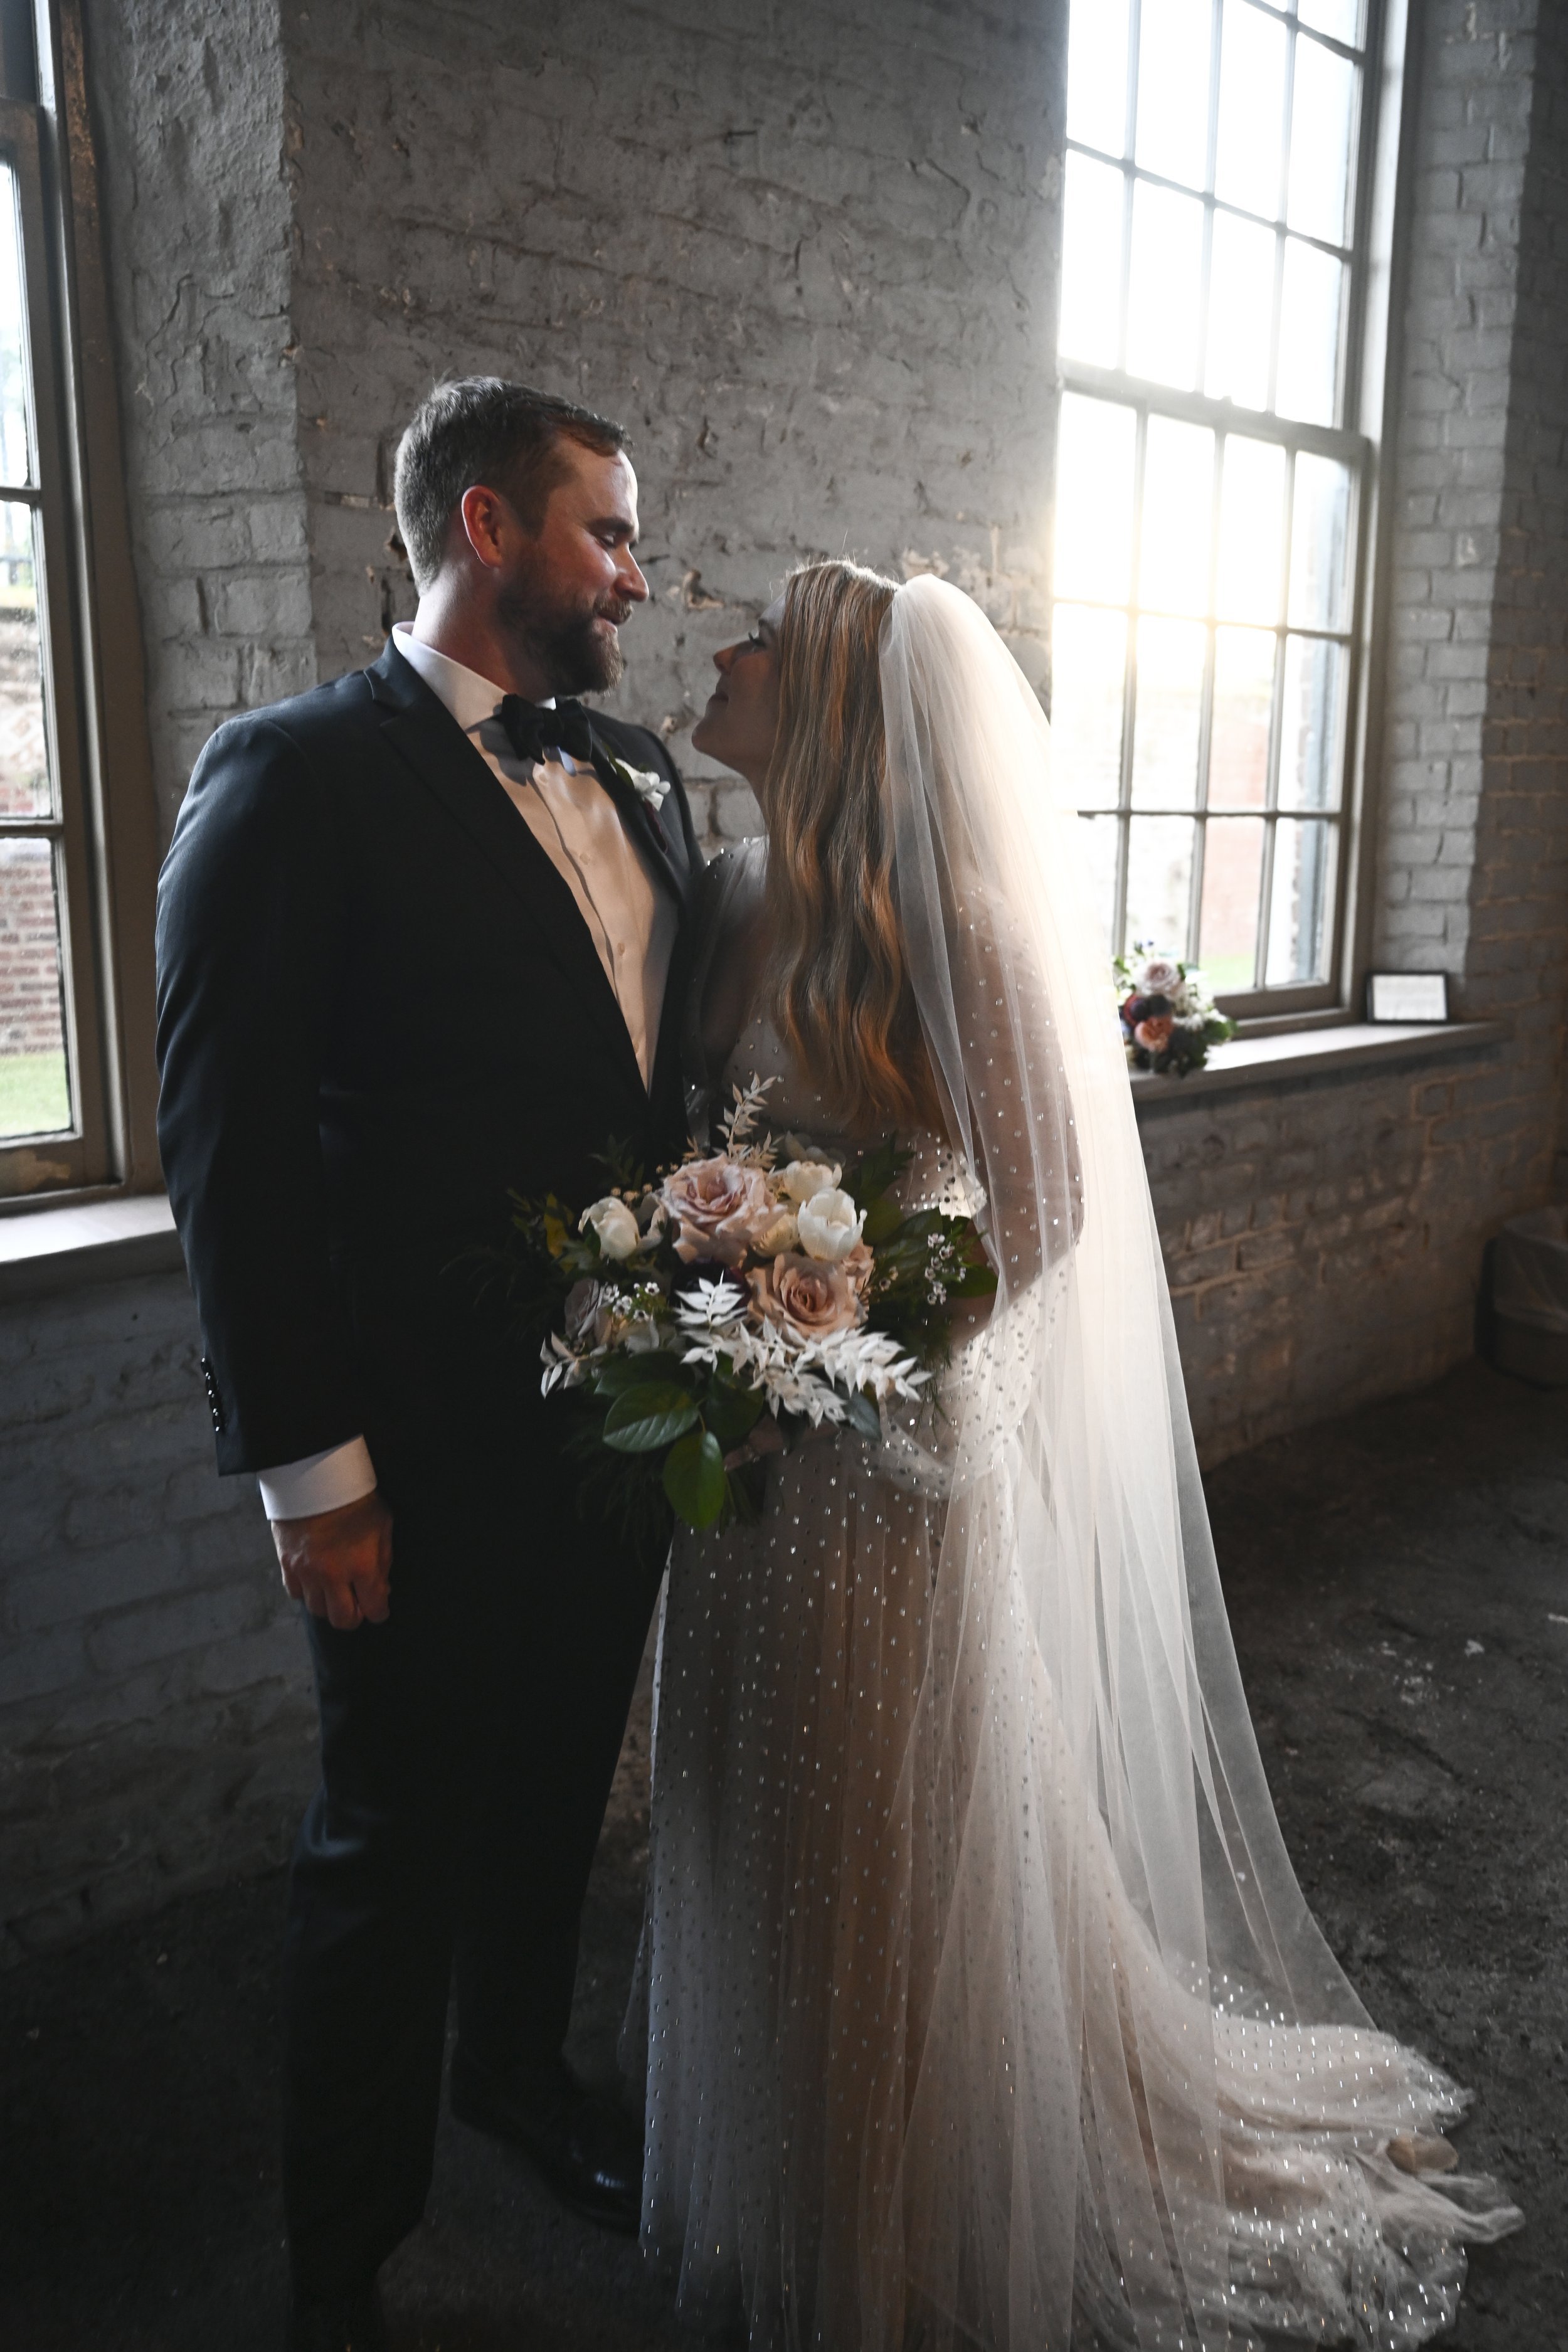 mckenna-and-isaacs-romantic-vintage-inspired-savannah-wedding-at-the-georgia-state-railroad-museum-planned-by-savannah-wedding-planner-ivory-and-beau-savannah-wedding-coordinator-georgia-wedding-planner-destination-wedding-planner-15.JPG